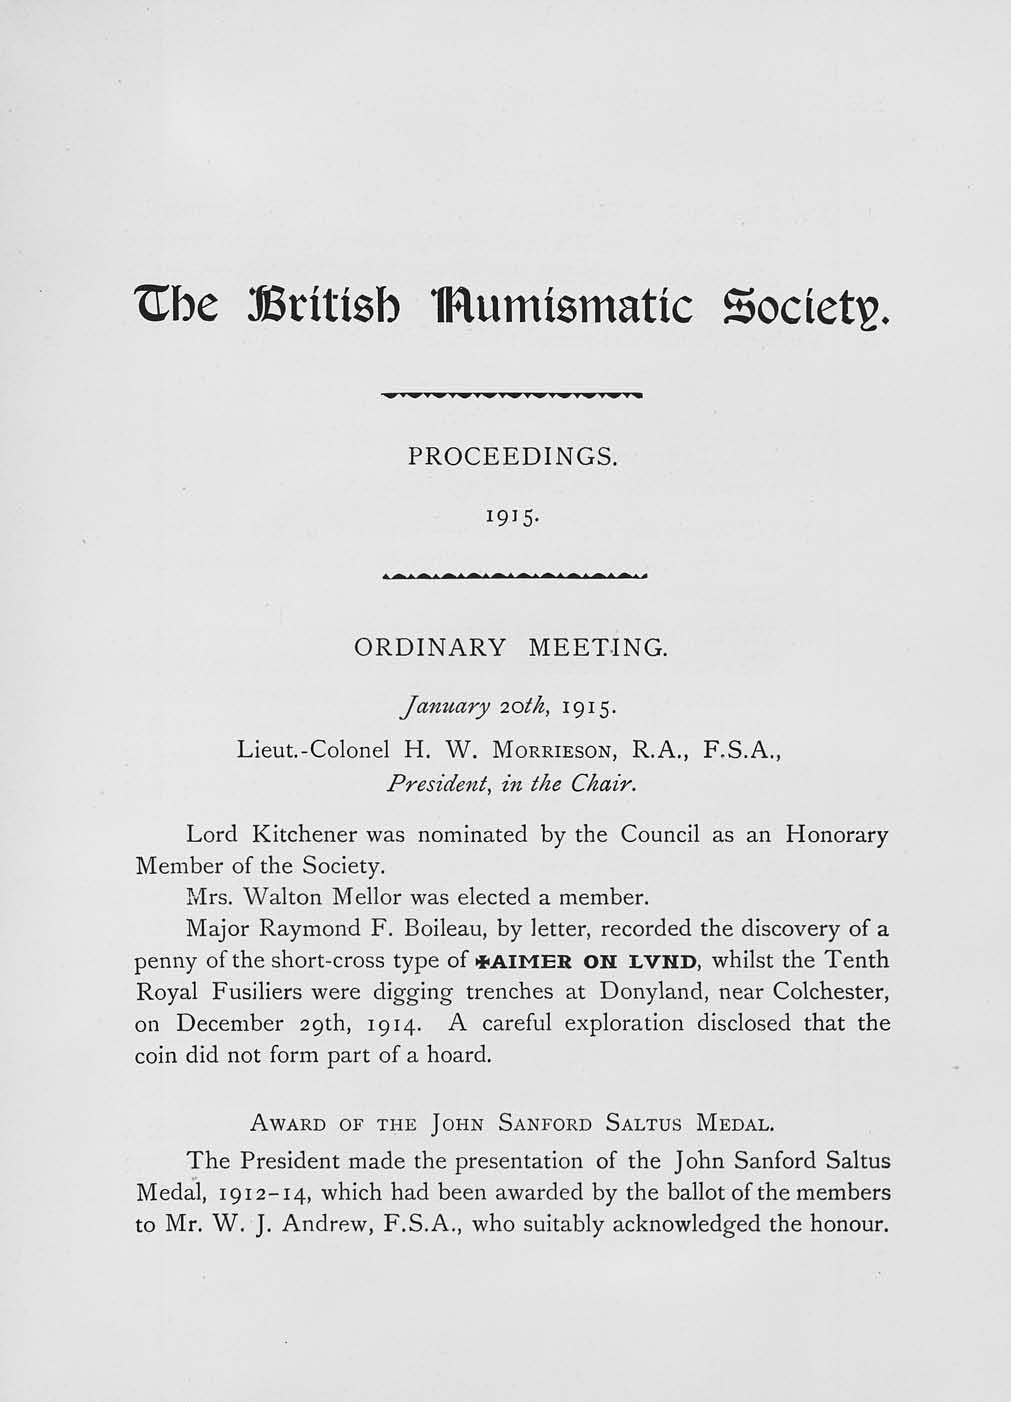 ftbe Britisb Burrusmatic Society. PROCEEDINGS. I N - ORDINARY MEETING. January 20th, 1915. Lieut.-Colonel H. W. MORRIESON, R.A., F.S.A., President, in the Chair.